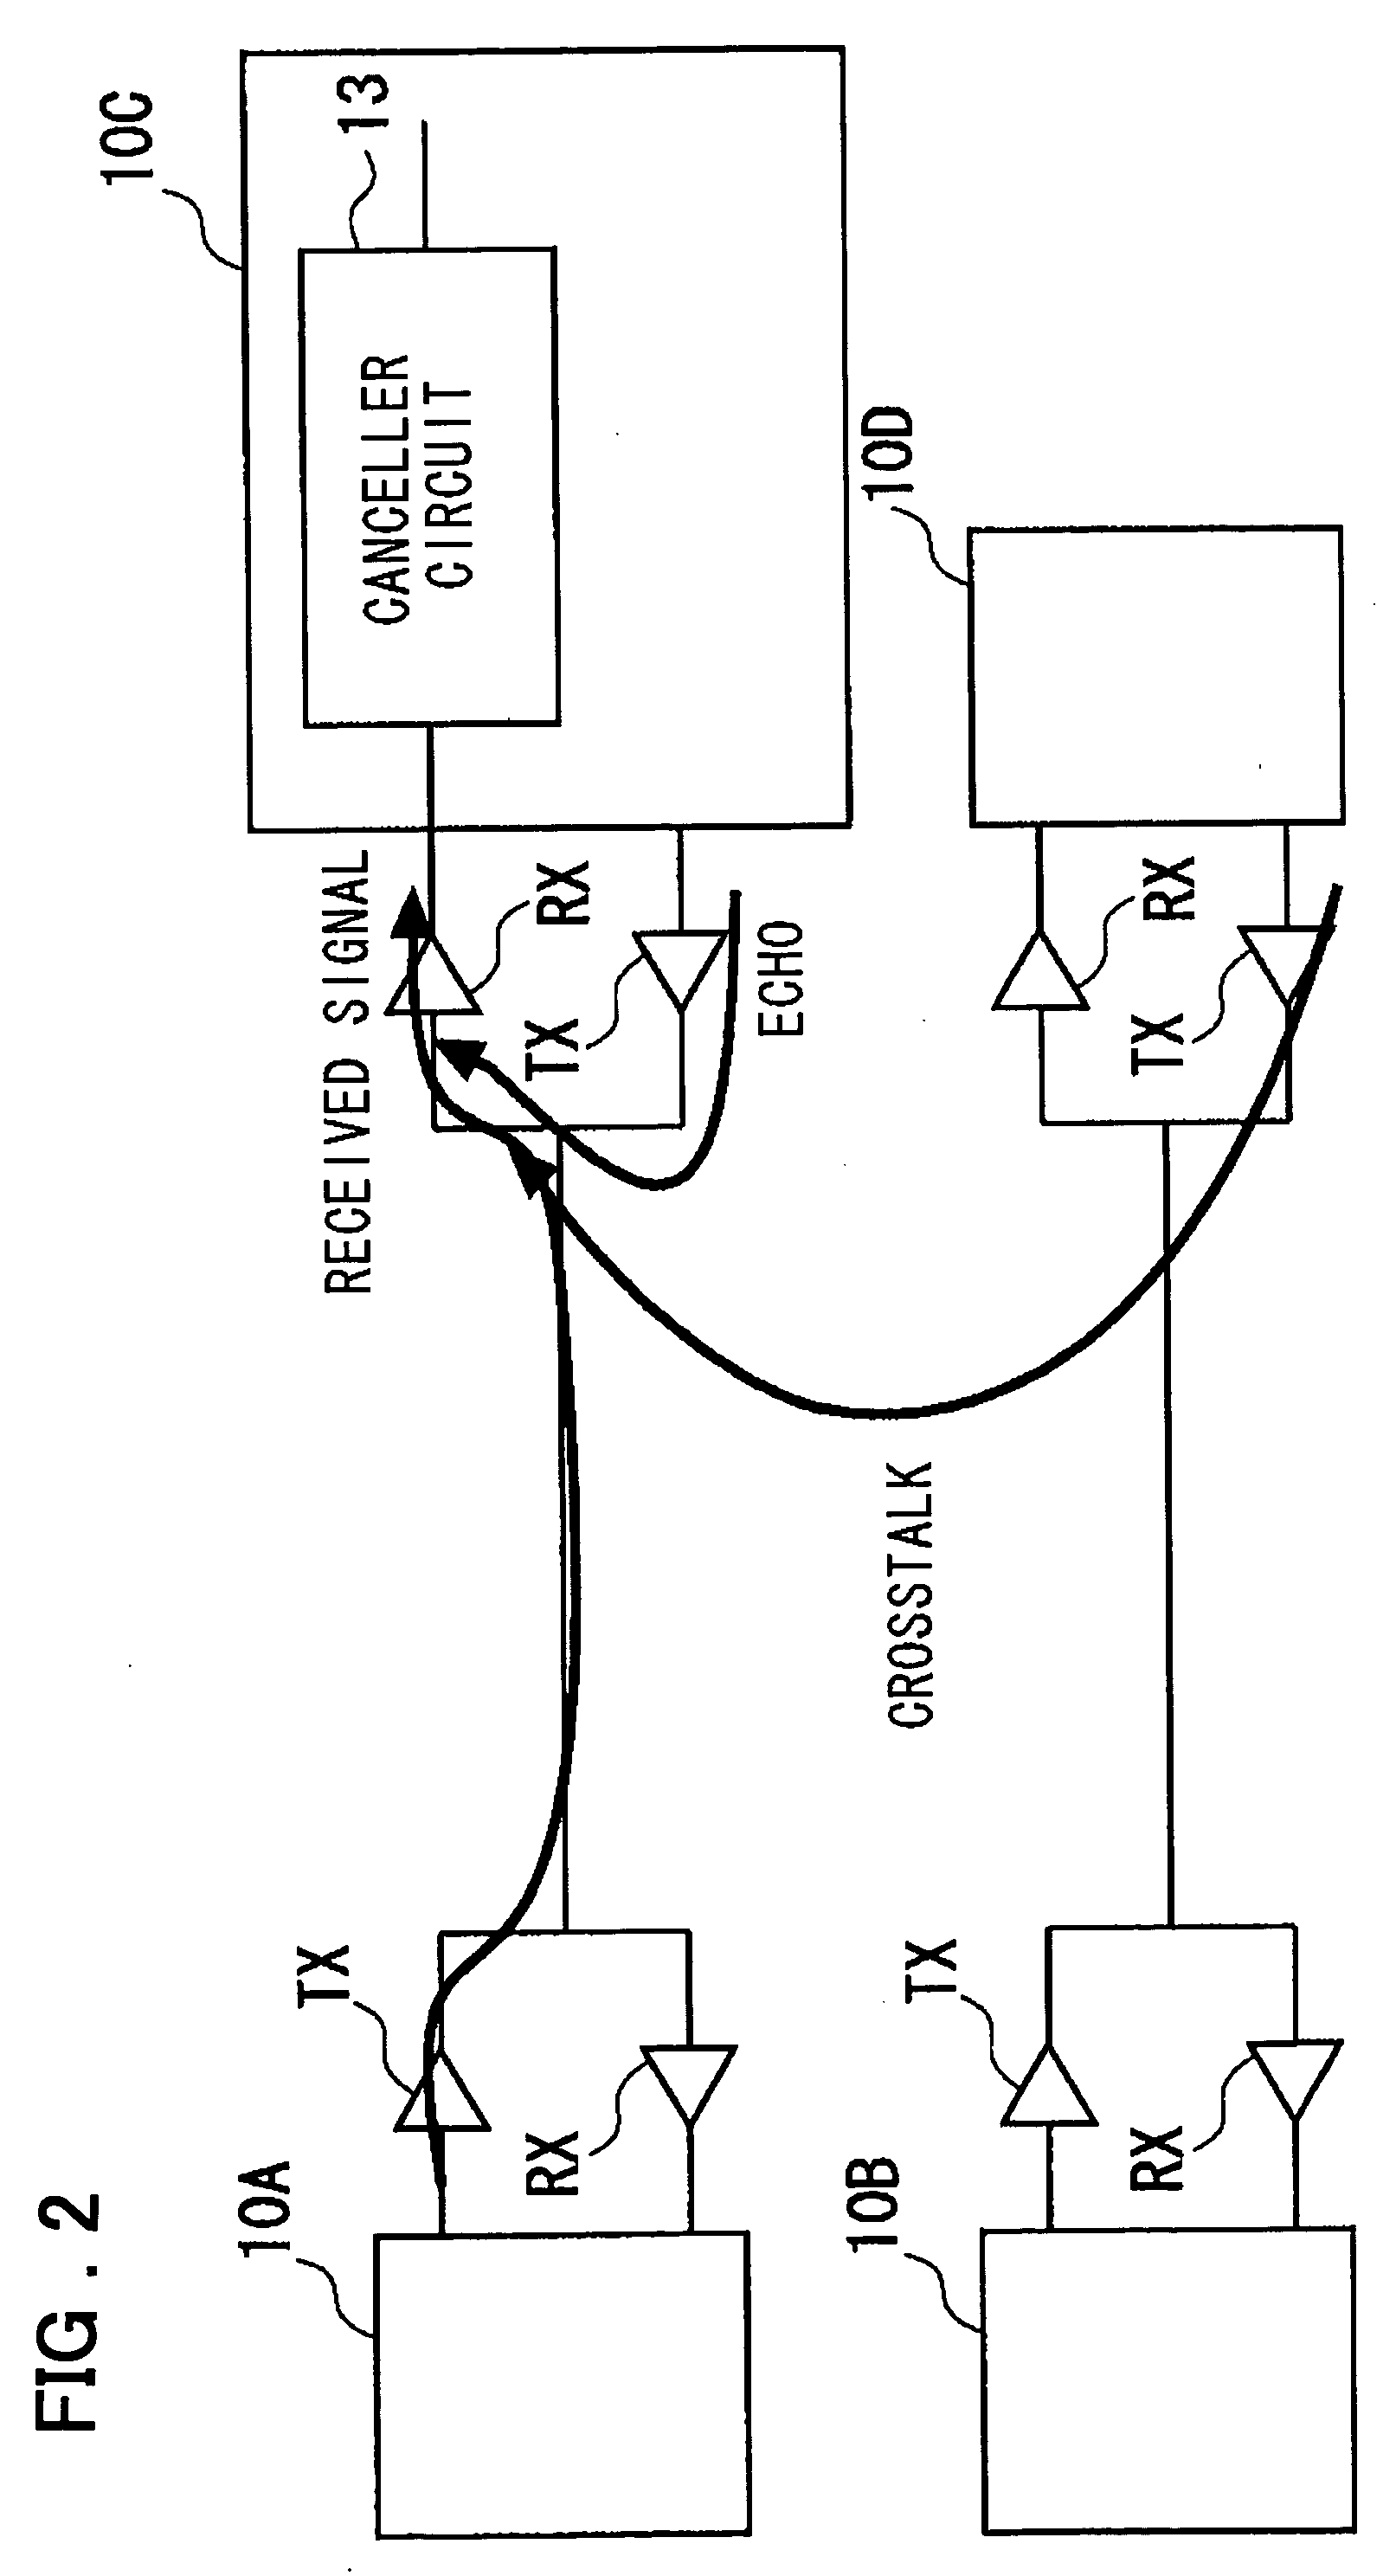 Canceller circuit and controlling method